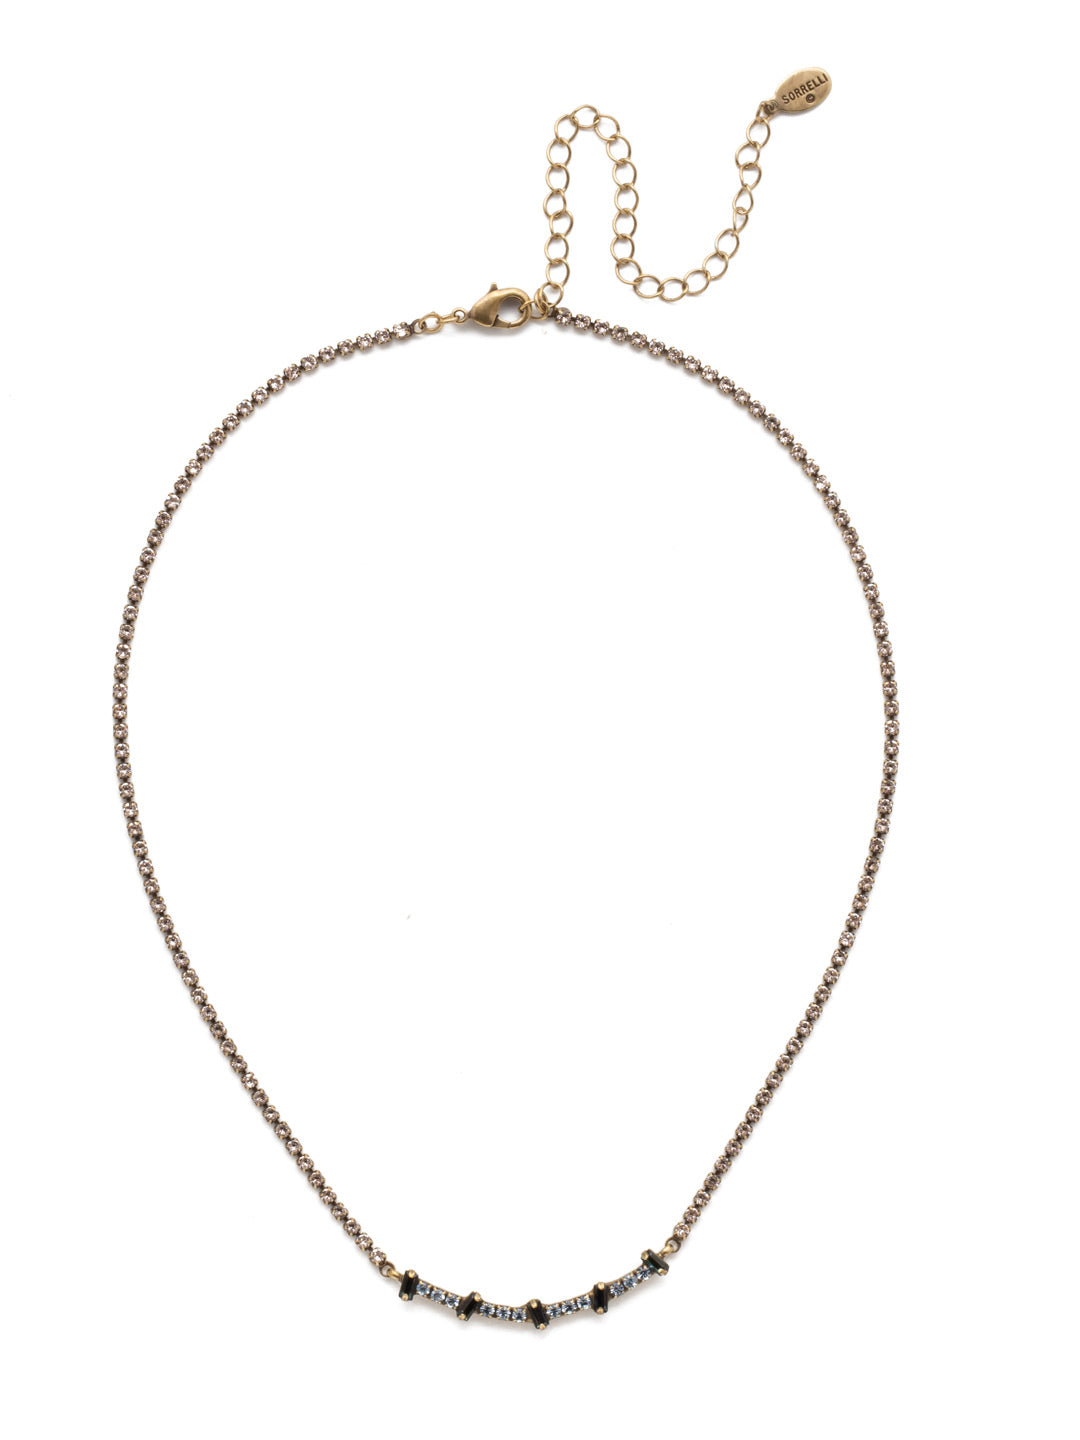 Velma Tennis Necklace - NEP8AGSDE - <p>The Velma Tennis Necklace is the piece you grab when you're looking for a simple shimmer of sparkling crystal. Round stones are offset by black baquette pieces for that something extra special. From Sorrelli's Selvedge Denim collection in our Antique Gold-tone finish.</p>